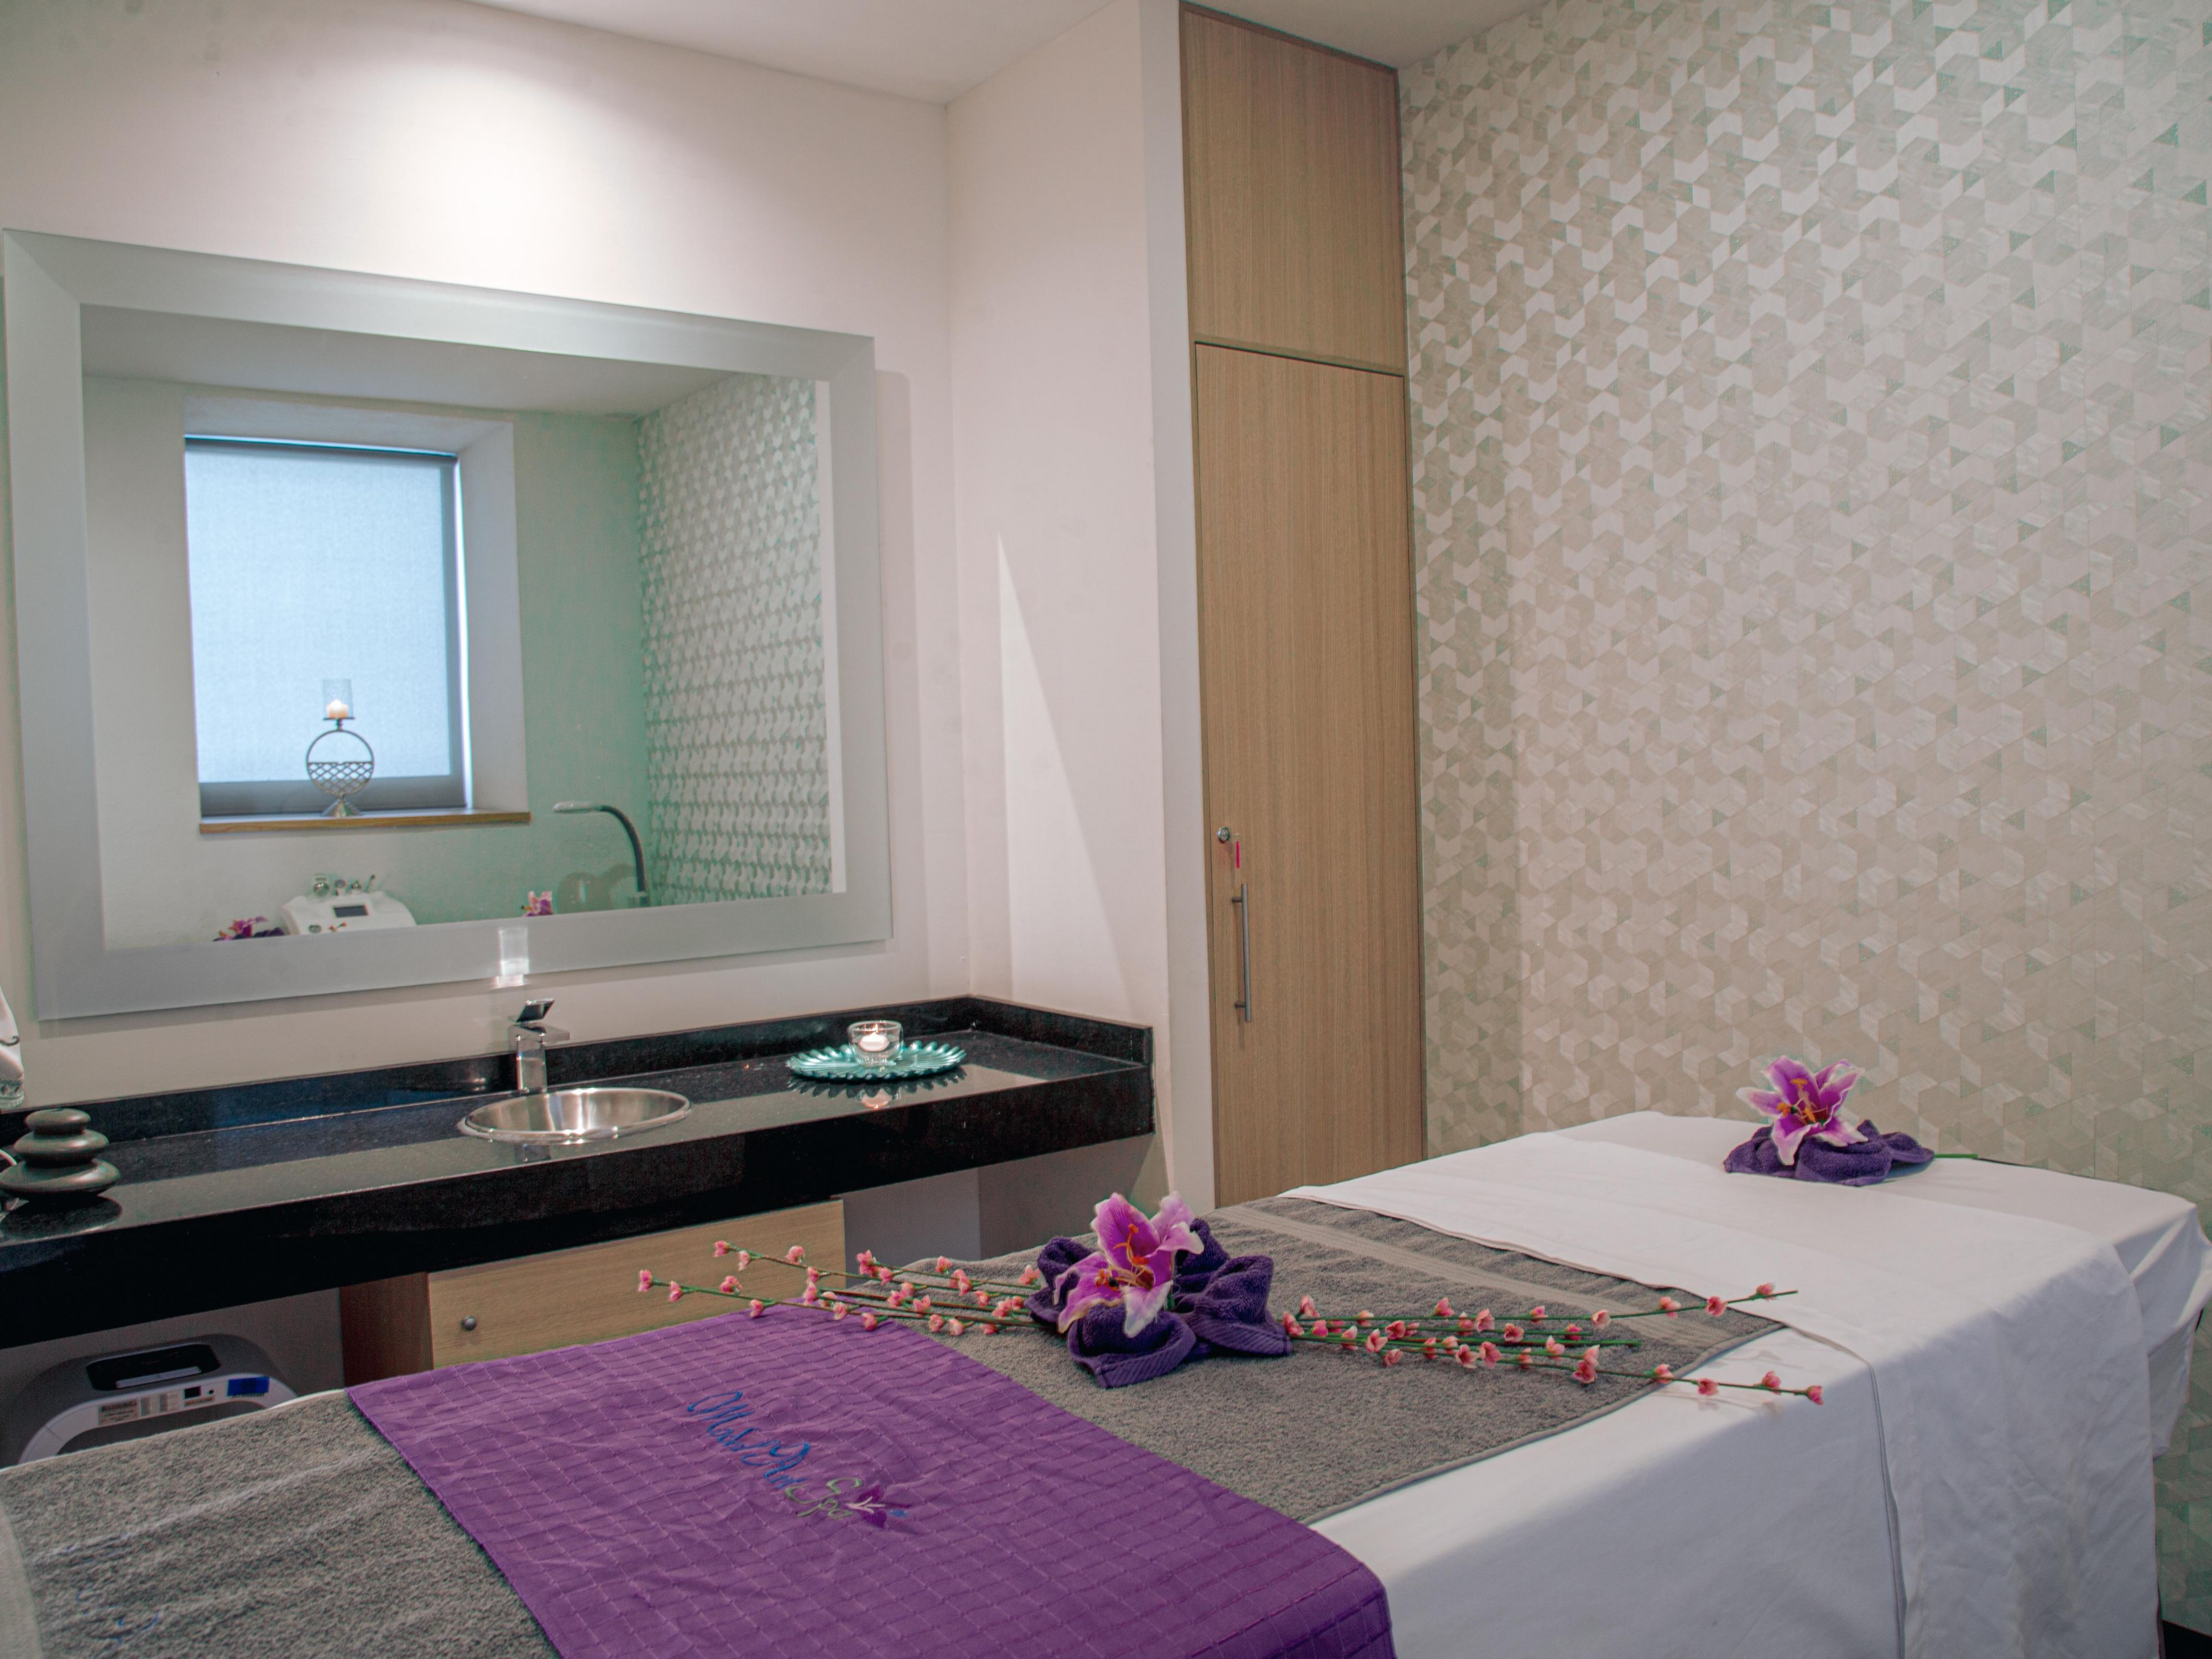 Come relax in Tlaxcala! Room & Spa